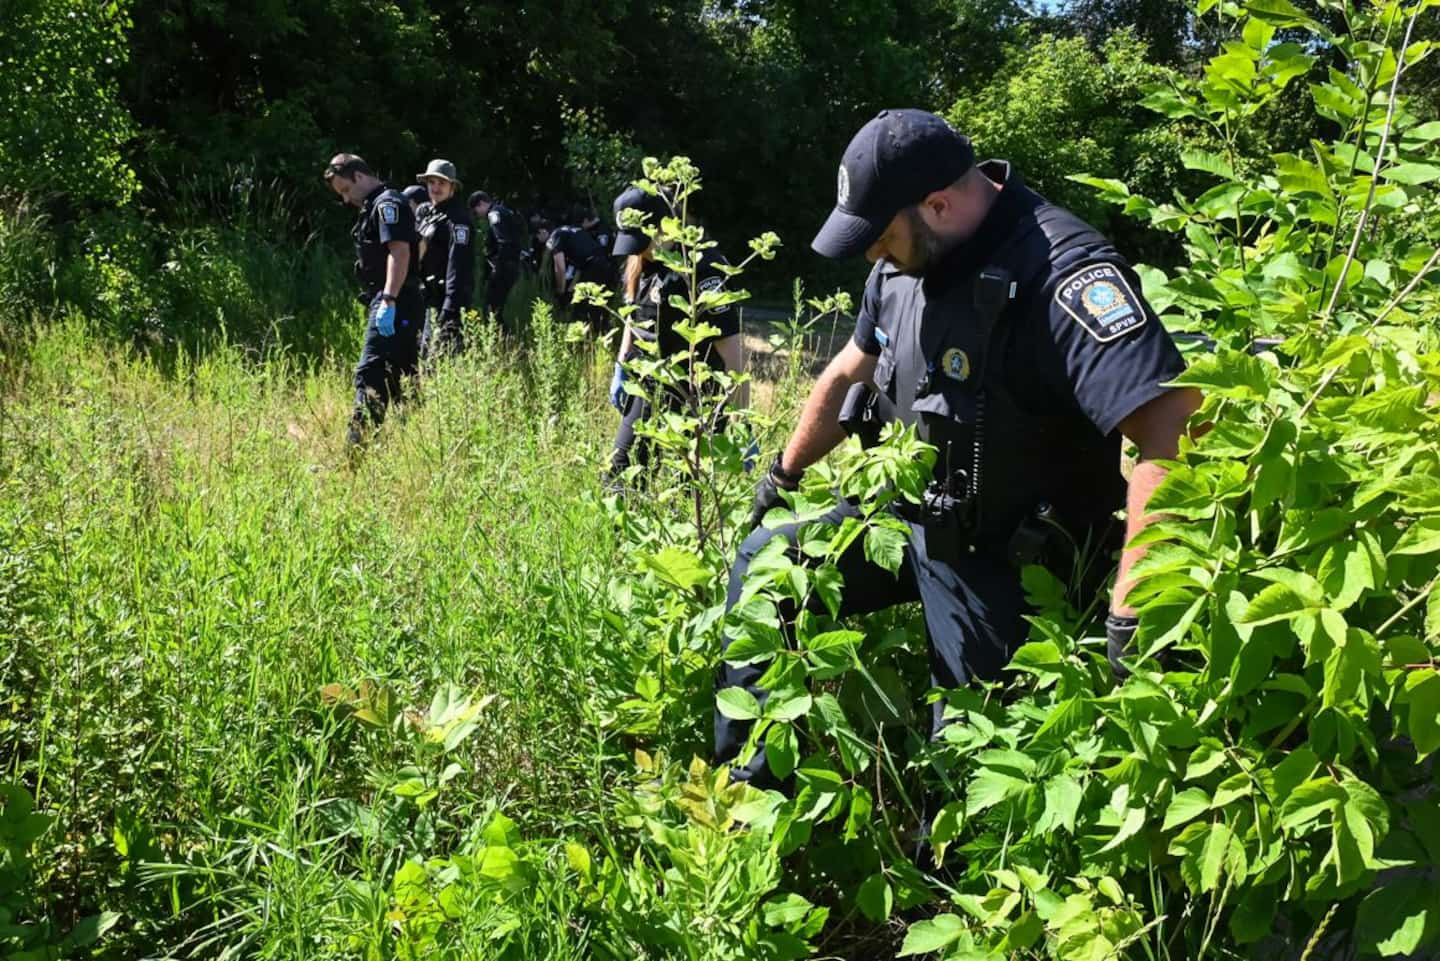 [PHOTOS] Murder of Meriem Boundaoui: the police search a wooded area in search of the murder weapon